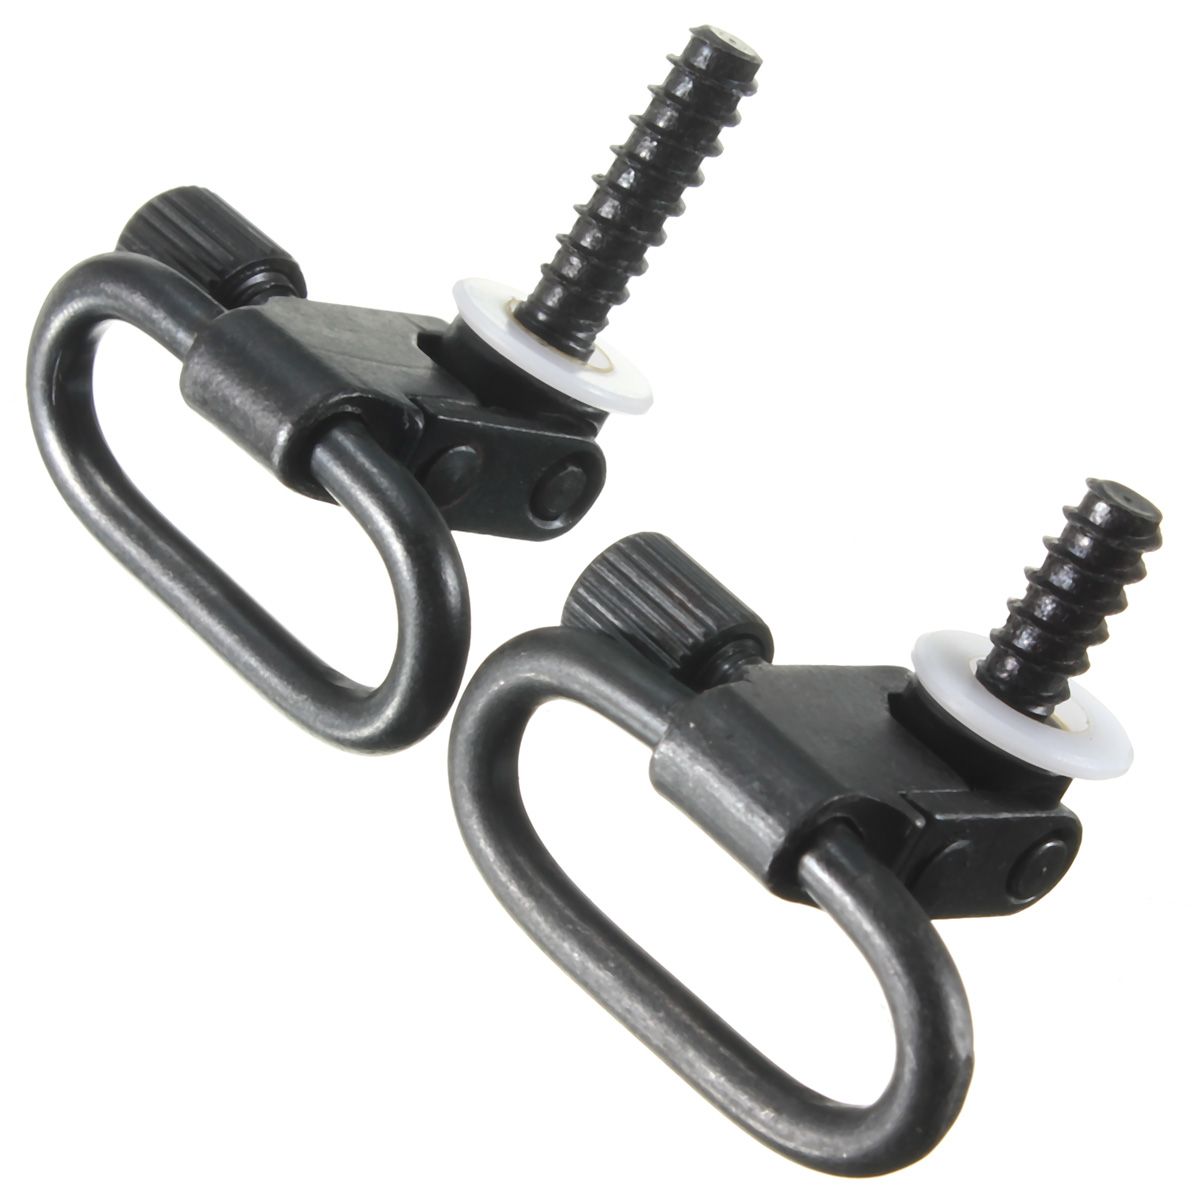 2Pcs-Black-Quick-Release-Detach-Sling-Mounting-Suspender-Loop-amp-Studs-With-White-Washers-1267491